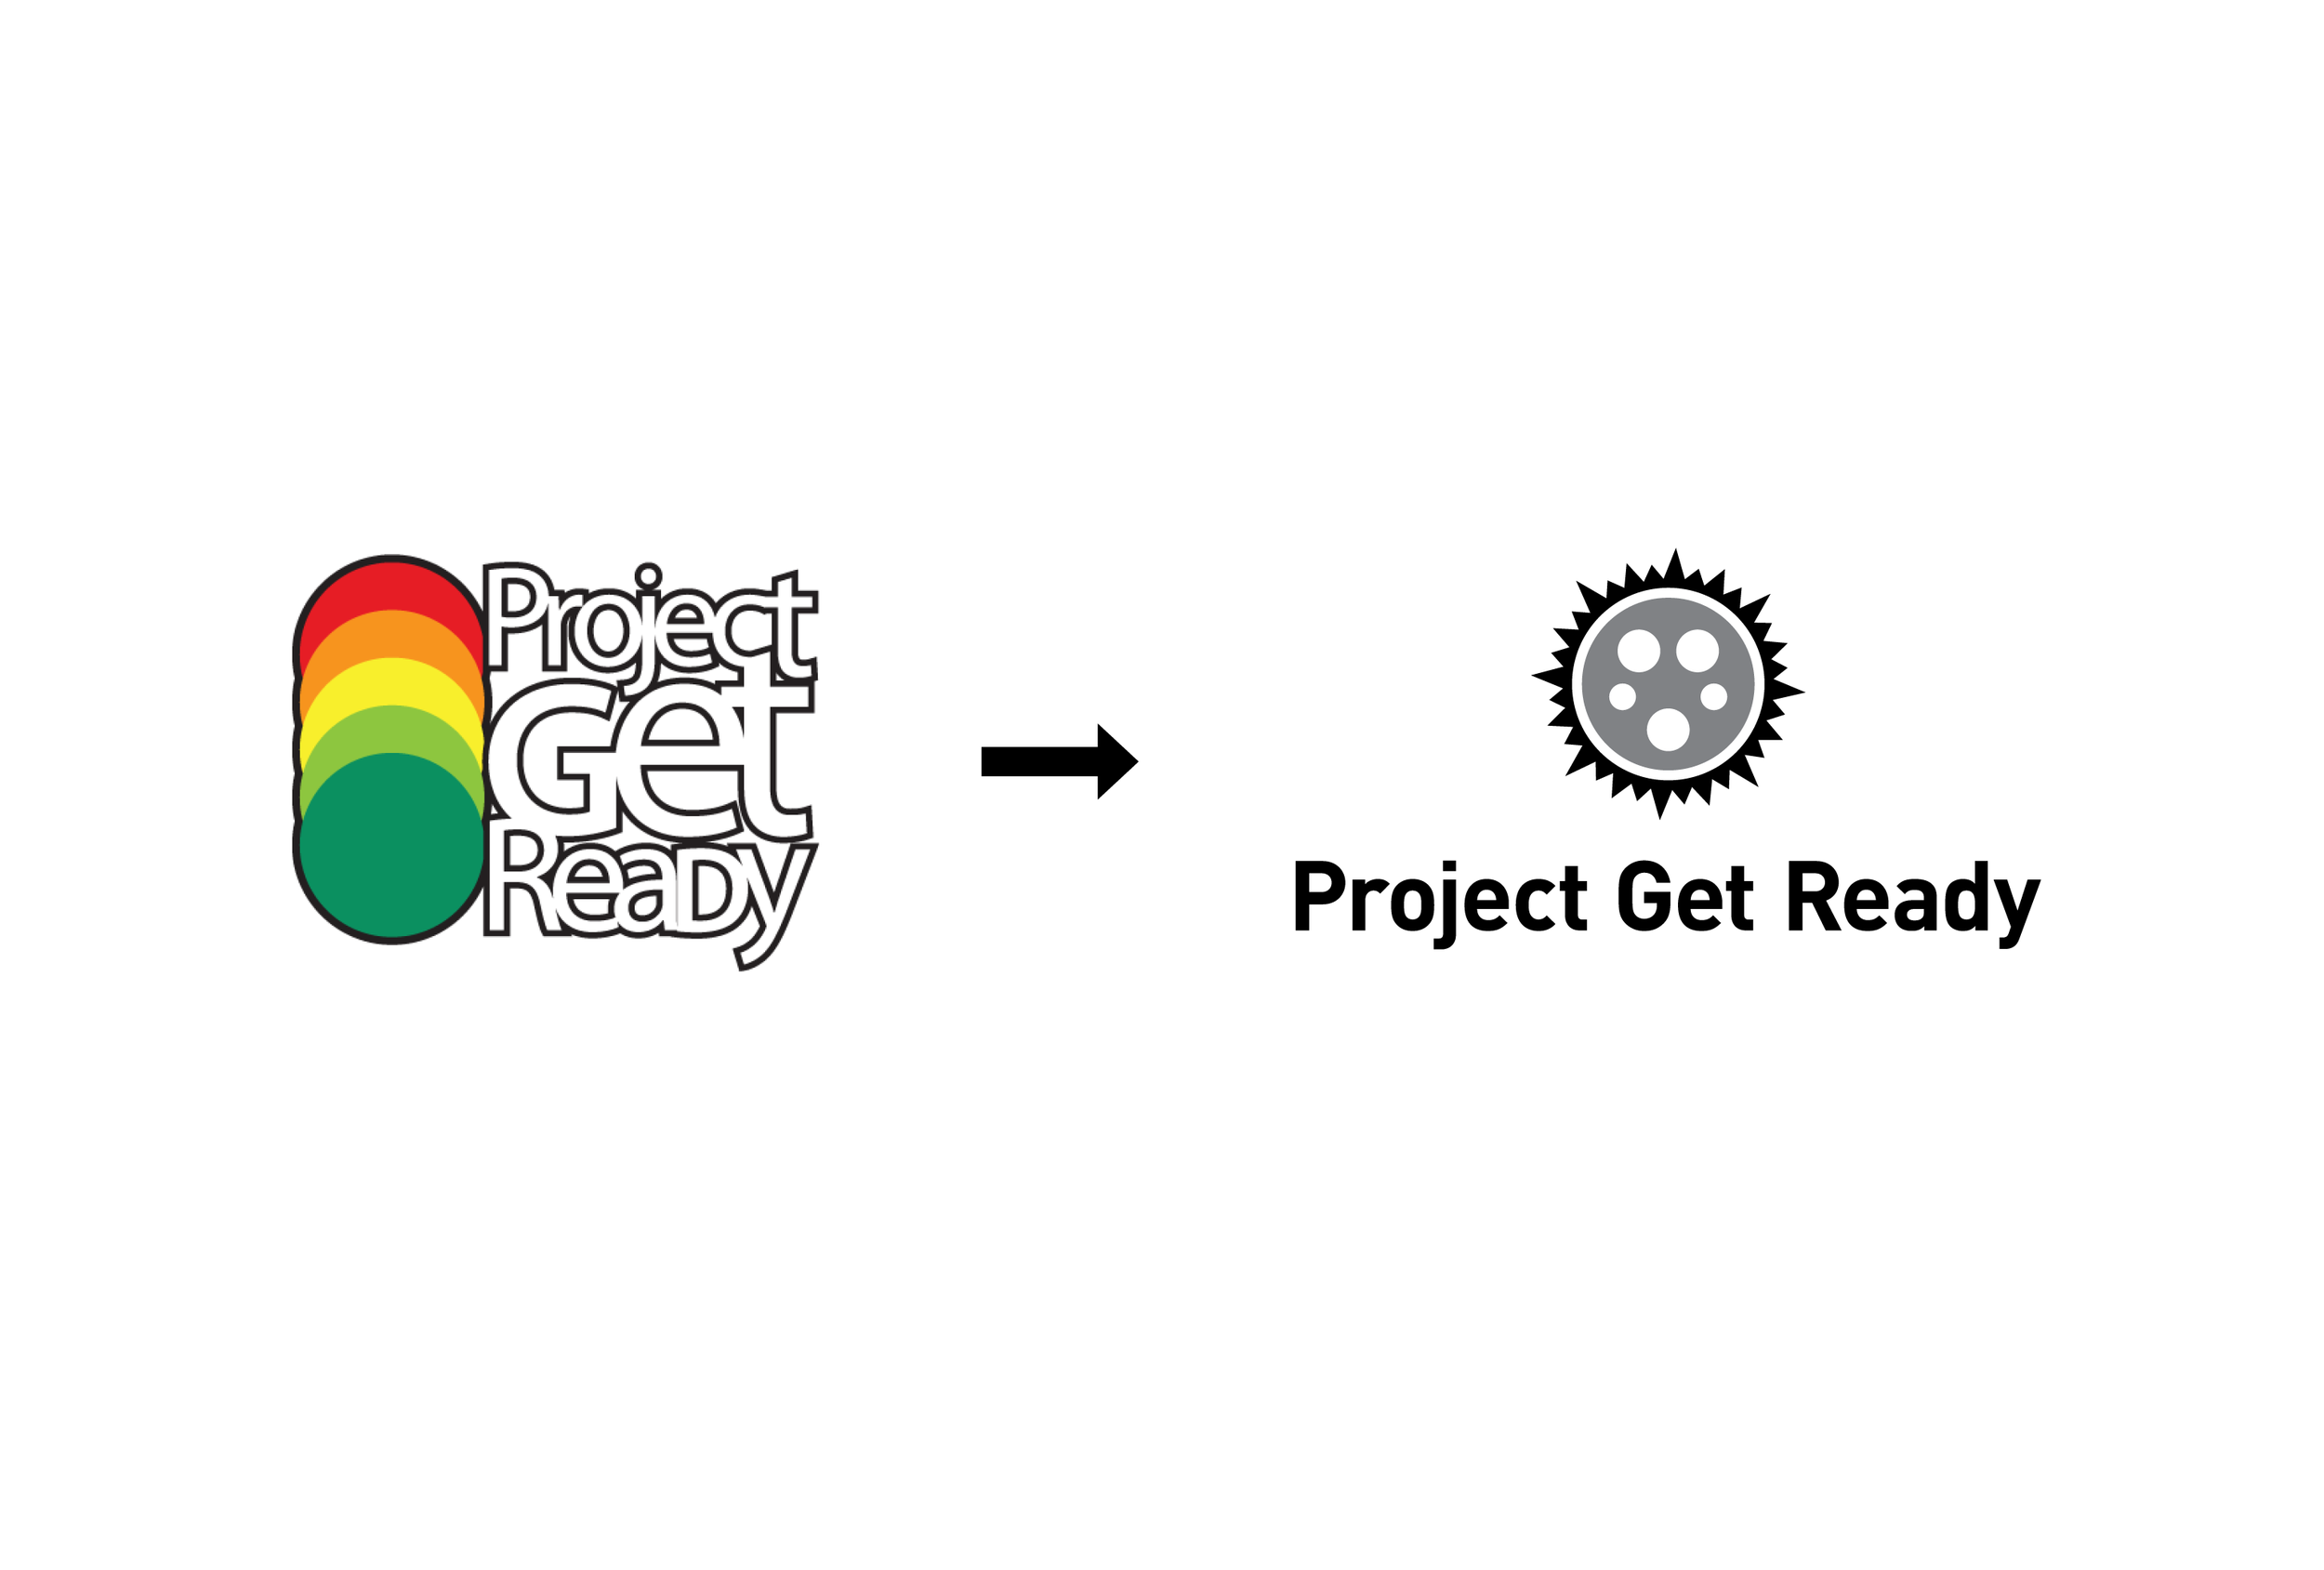 Project Get Ready logo.